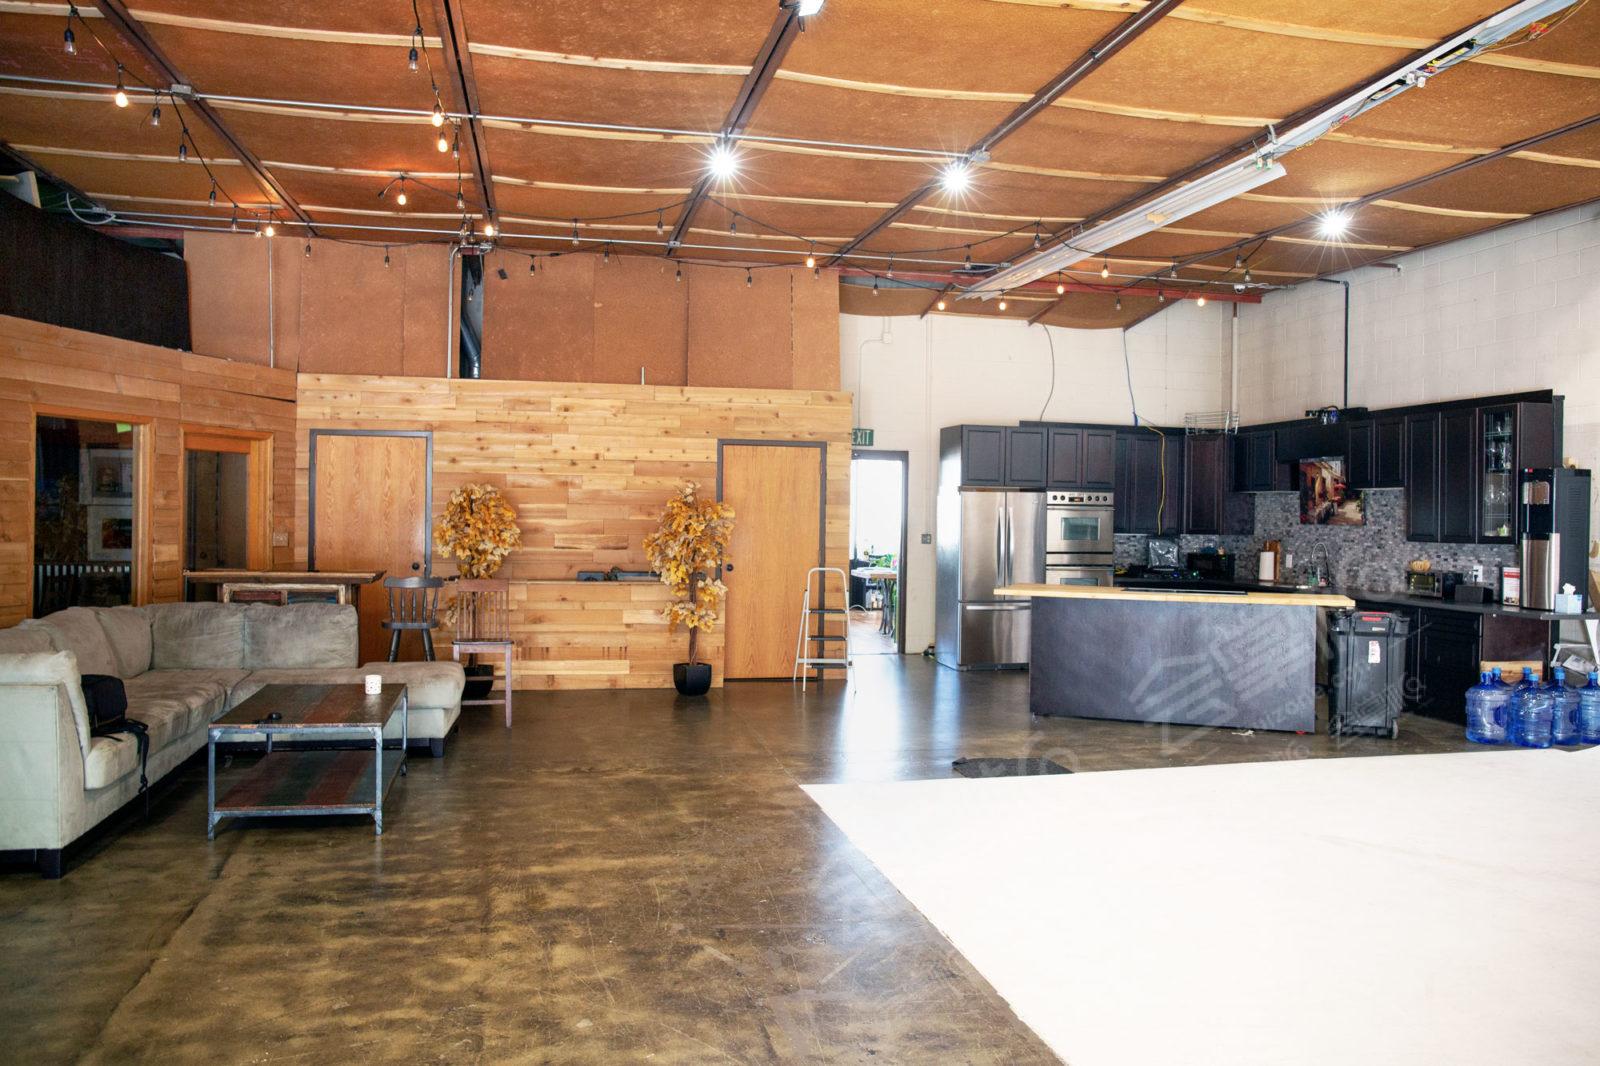 DENVER PRODUCTION STUDIO FOR VIDEO AND PHOTOGRAPHY